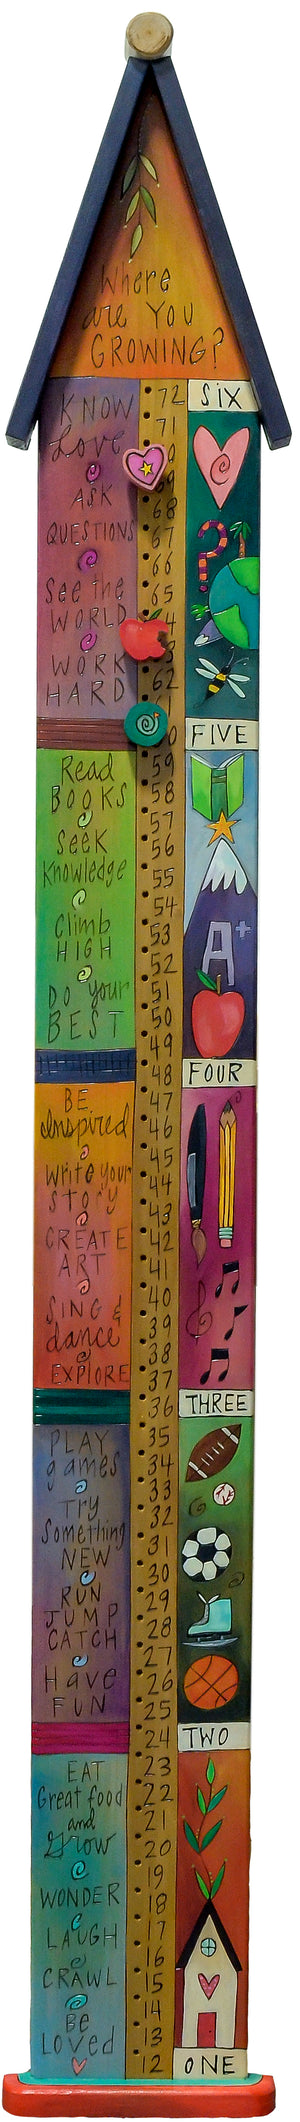 Growth Chart with Pegs – "Where are you growing?" growth chart with inspirational phrases on one side and fun imagery down the other